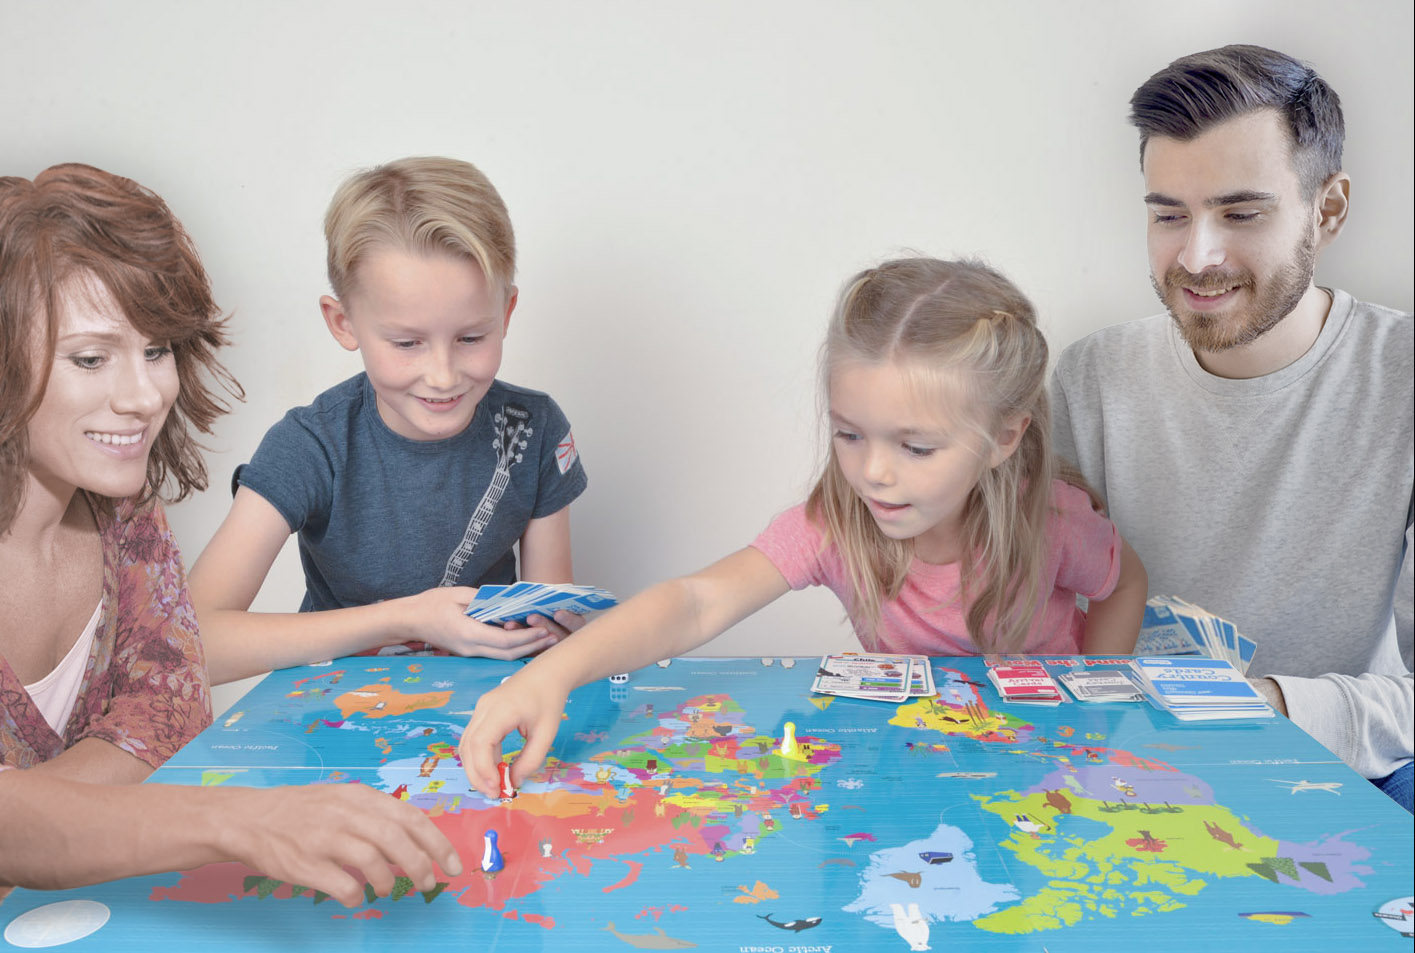 Geography games for children | Kids' geography board games | Geography